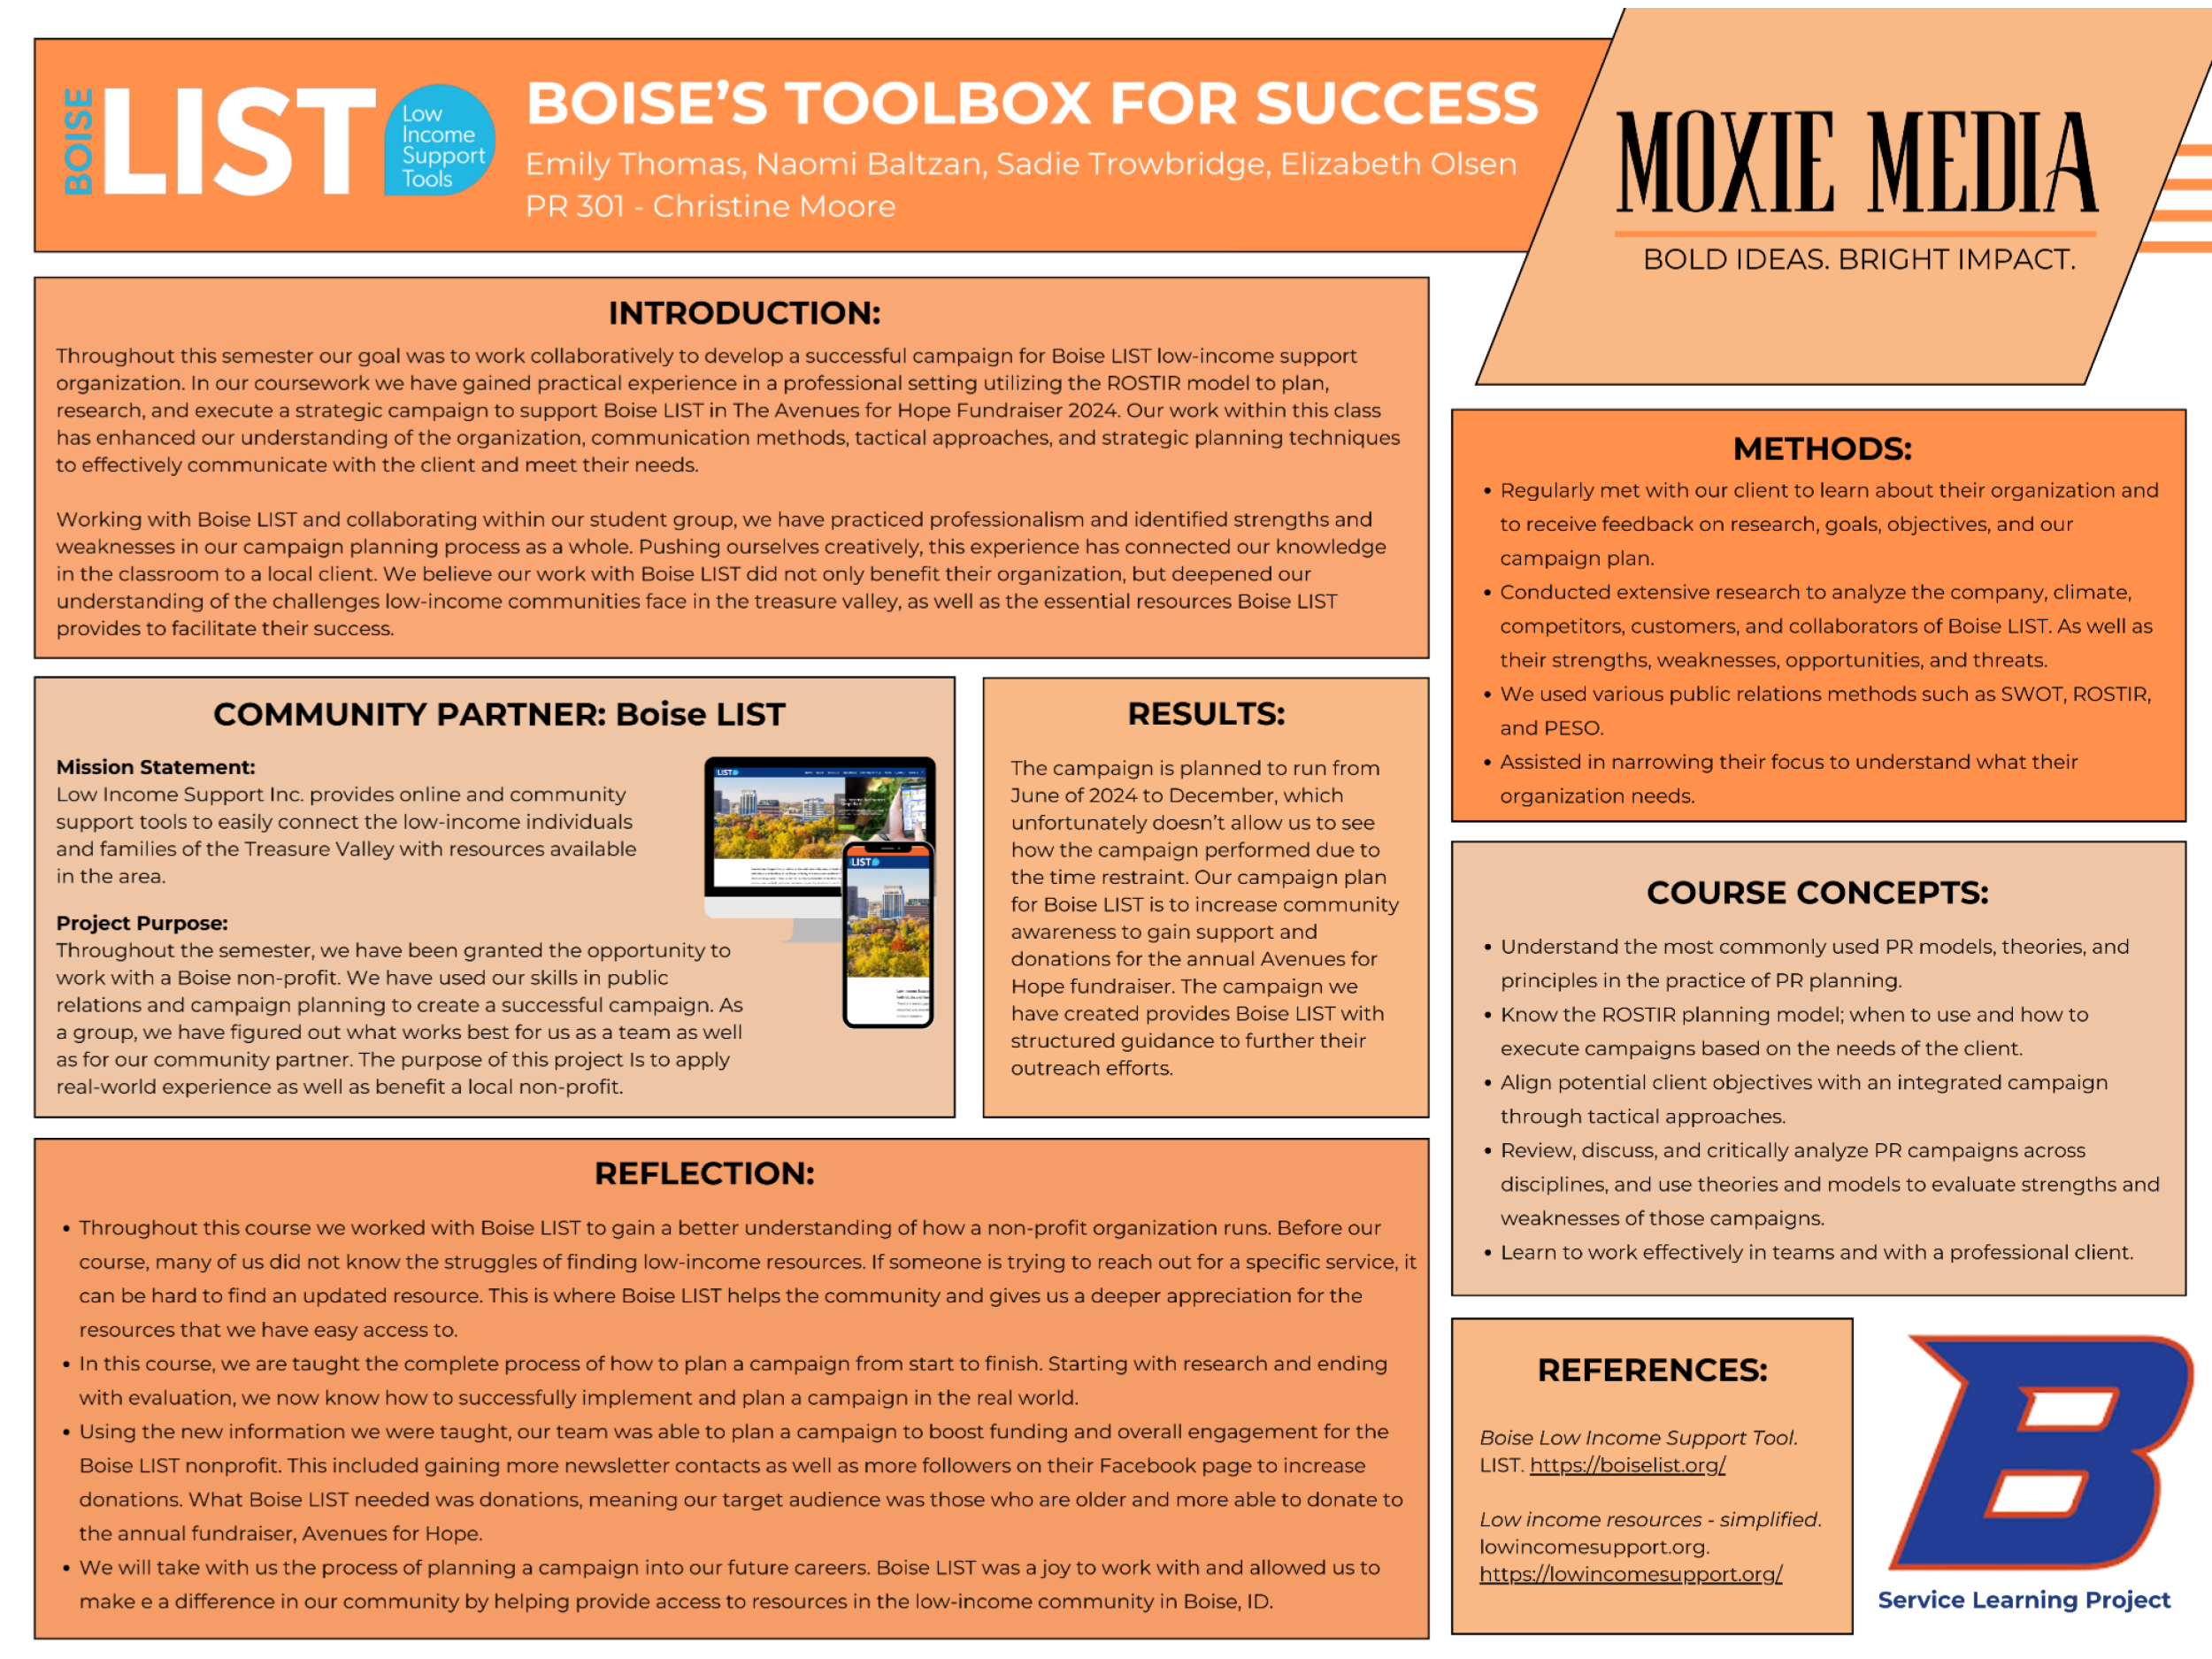 Image of student poster. Continue reading for accessible text and full content.